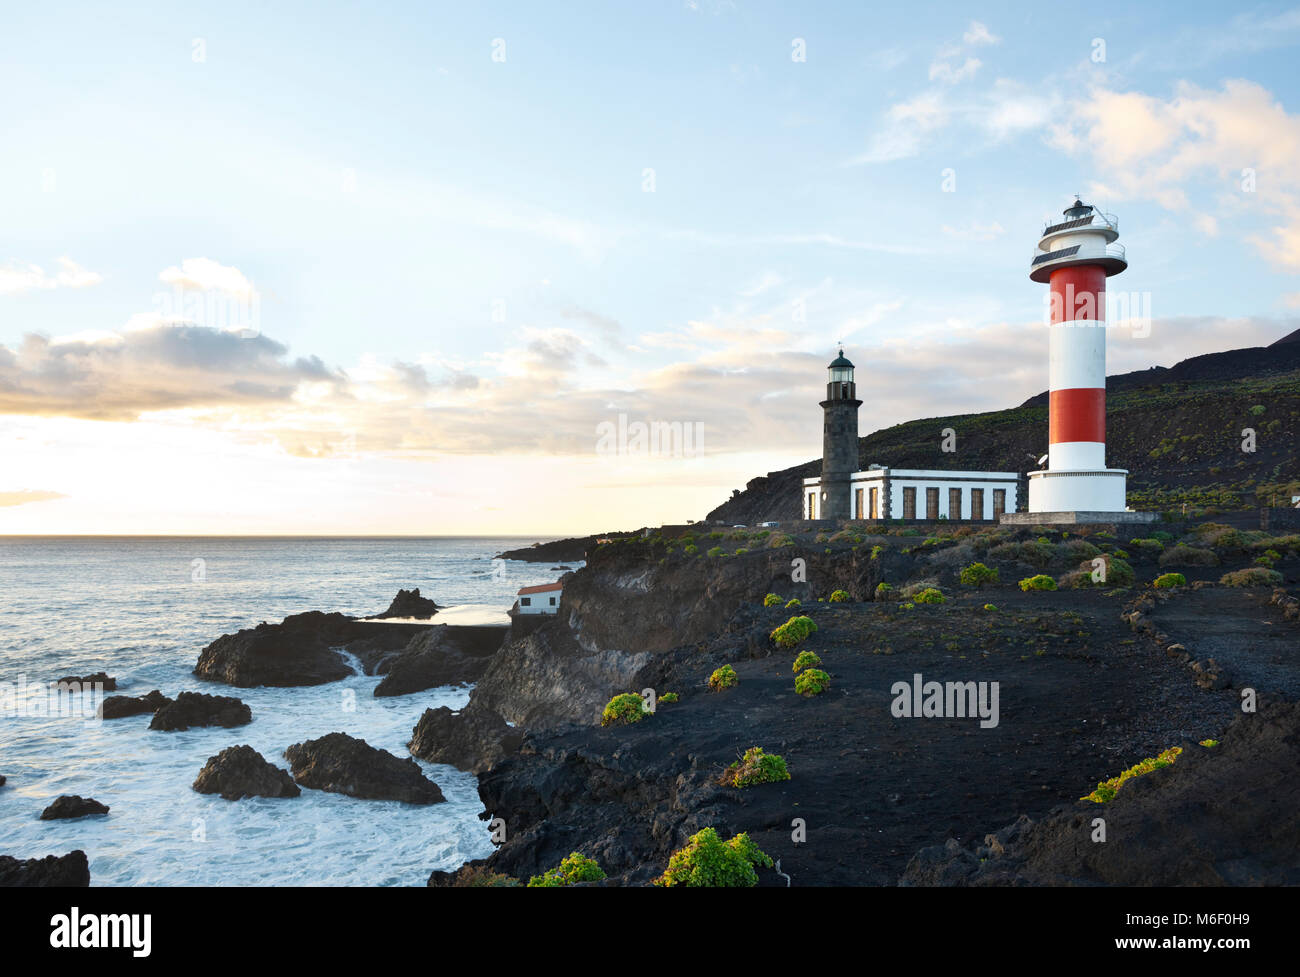 The lighthouse in Fuencaliente, La Palma, Spain. Stock Photo